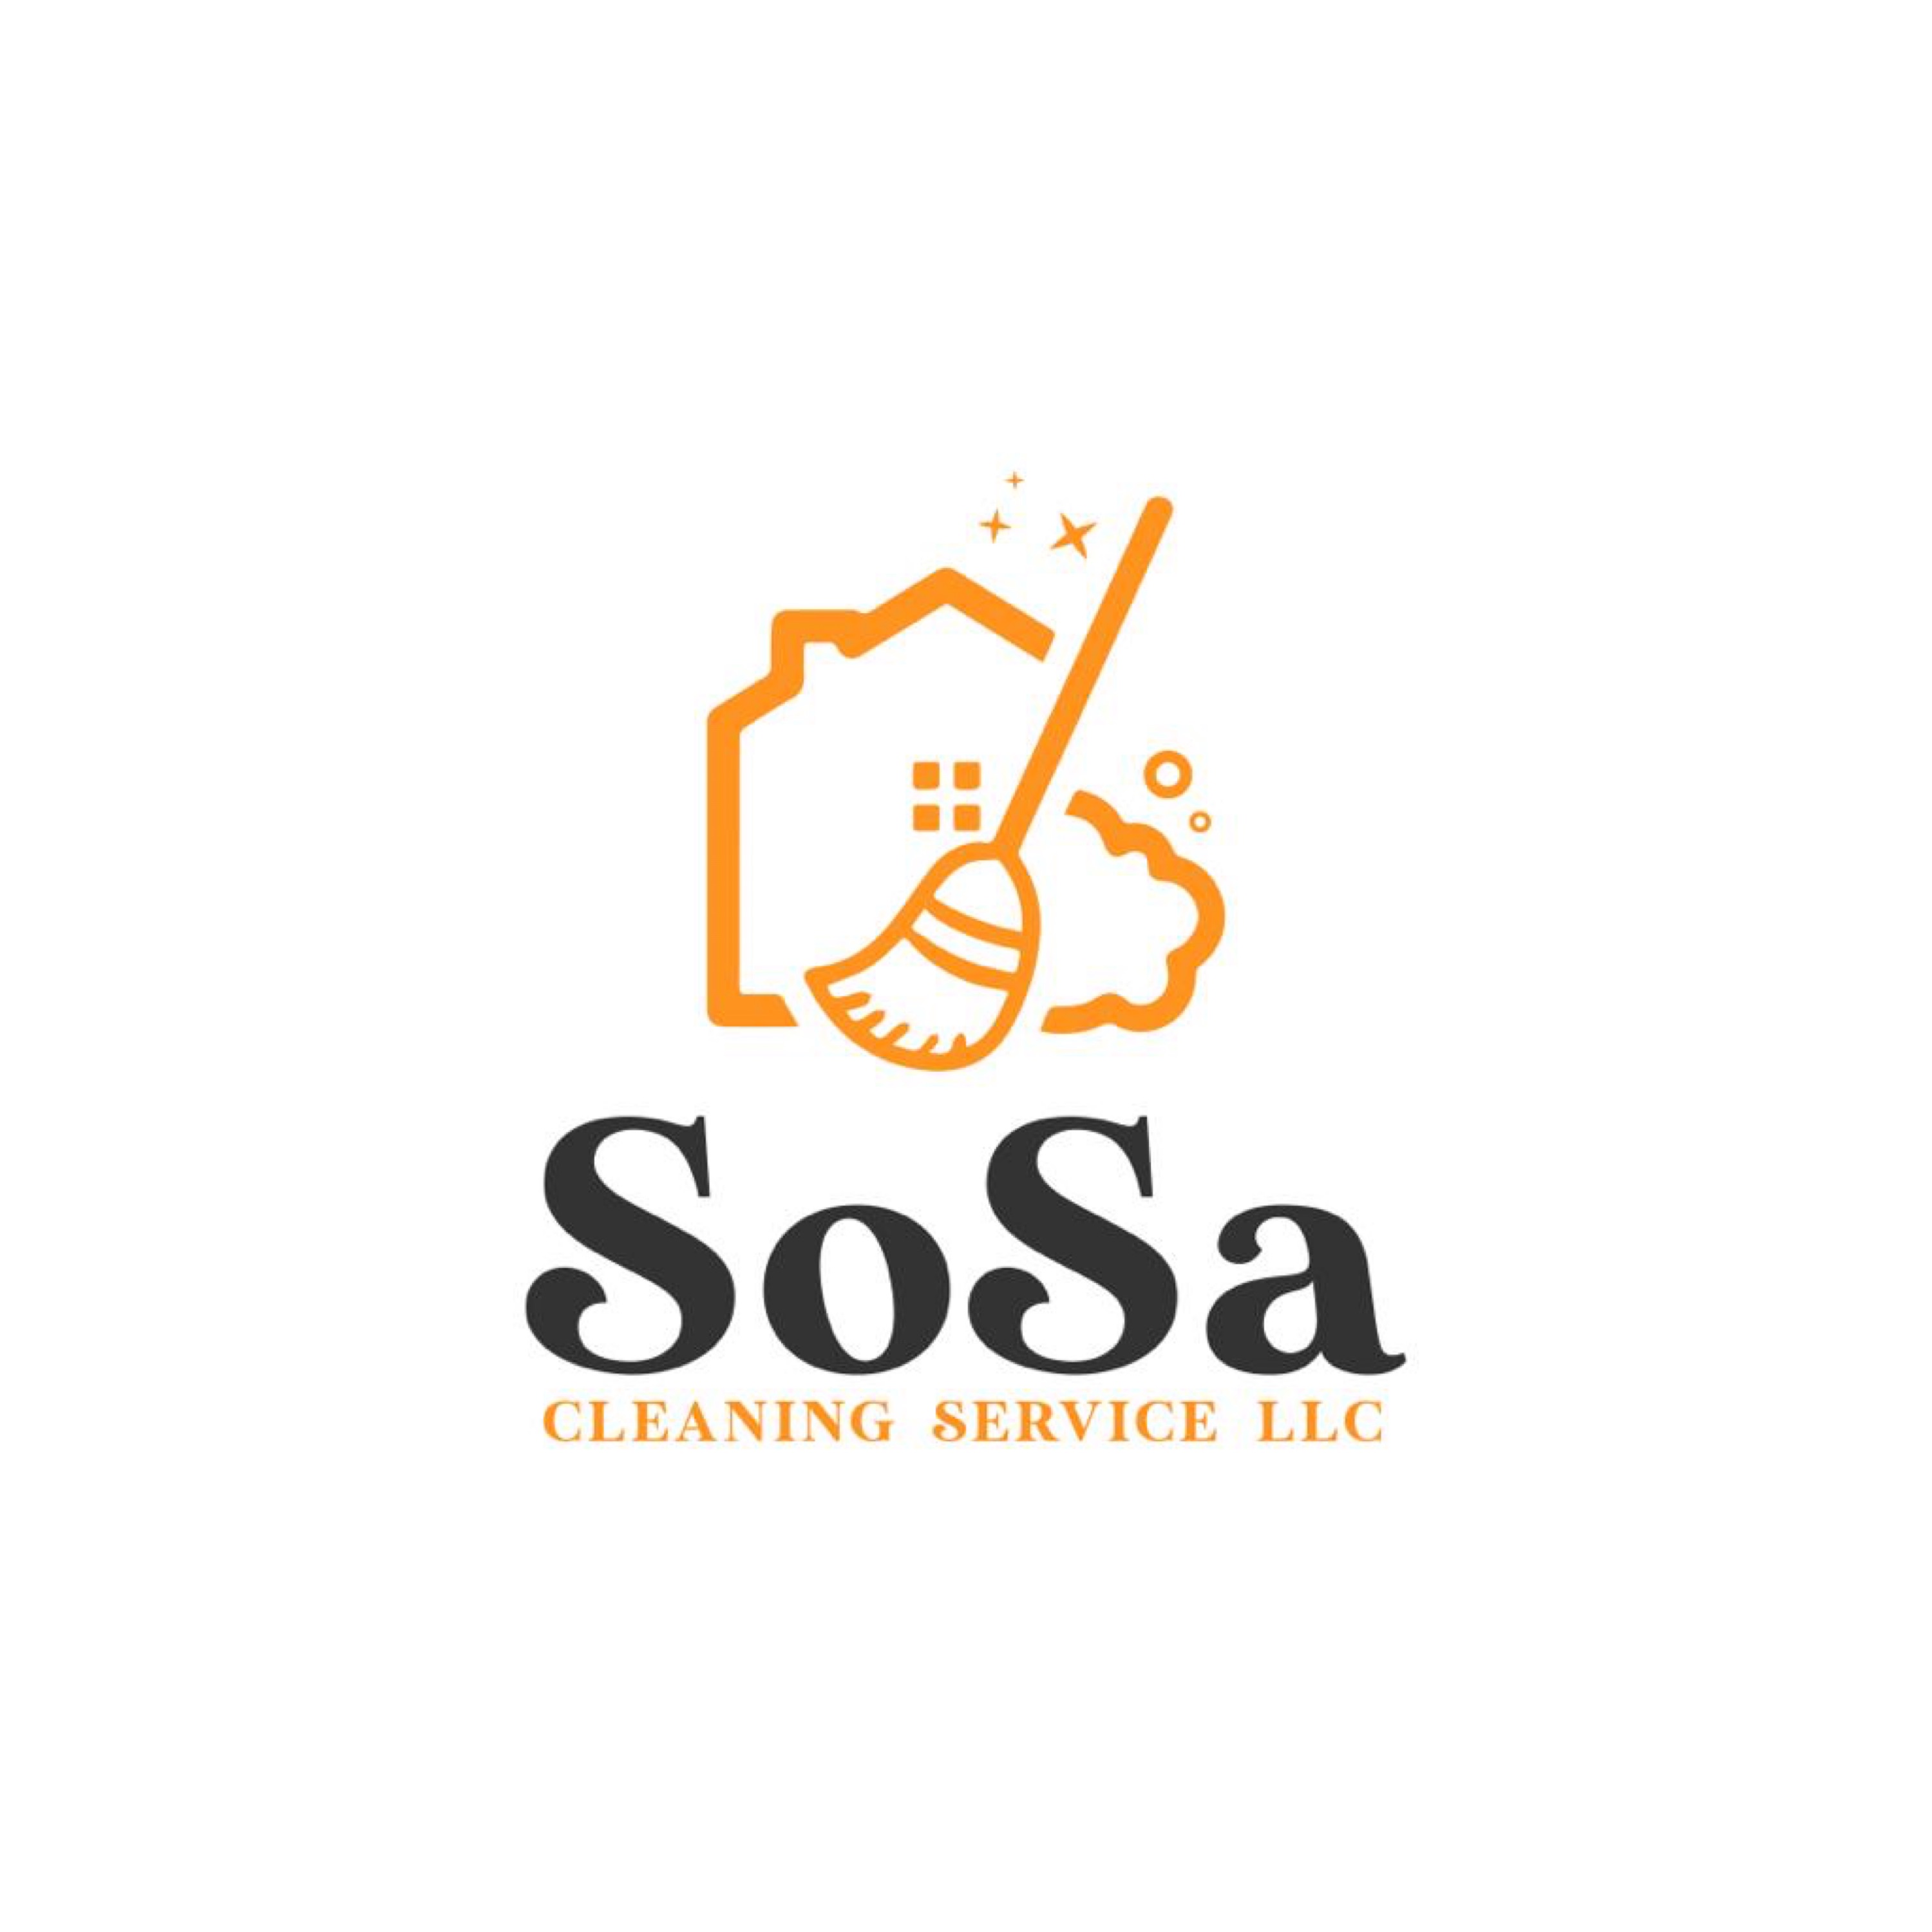 SoSa Cleaning Services Logo